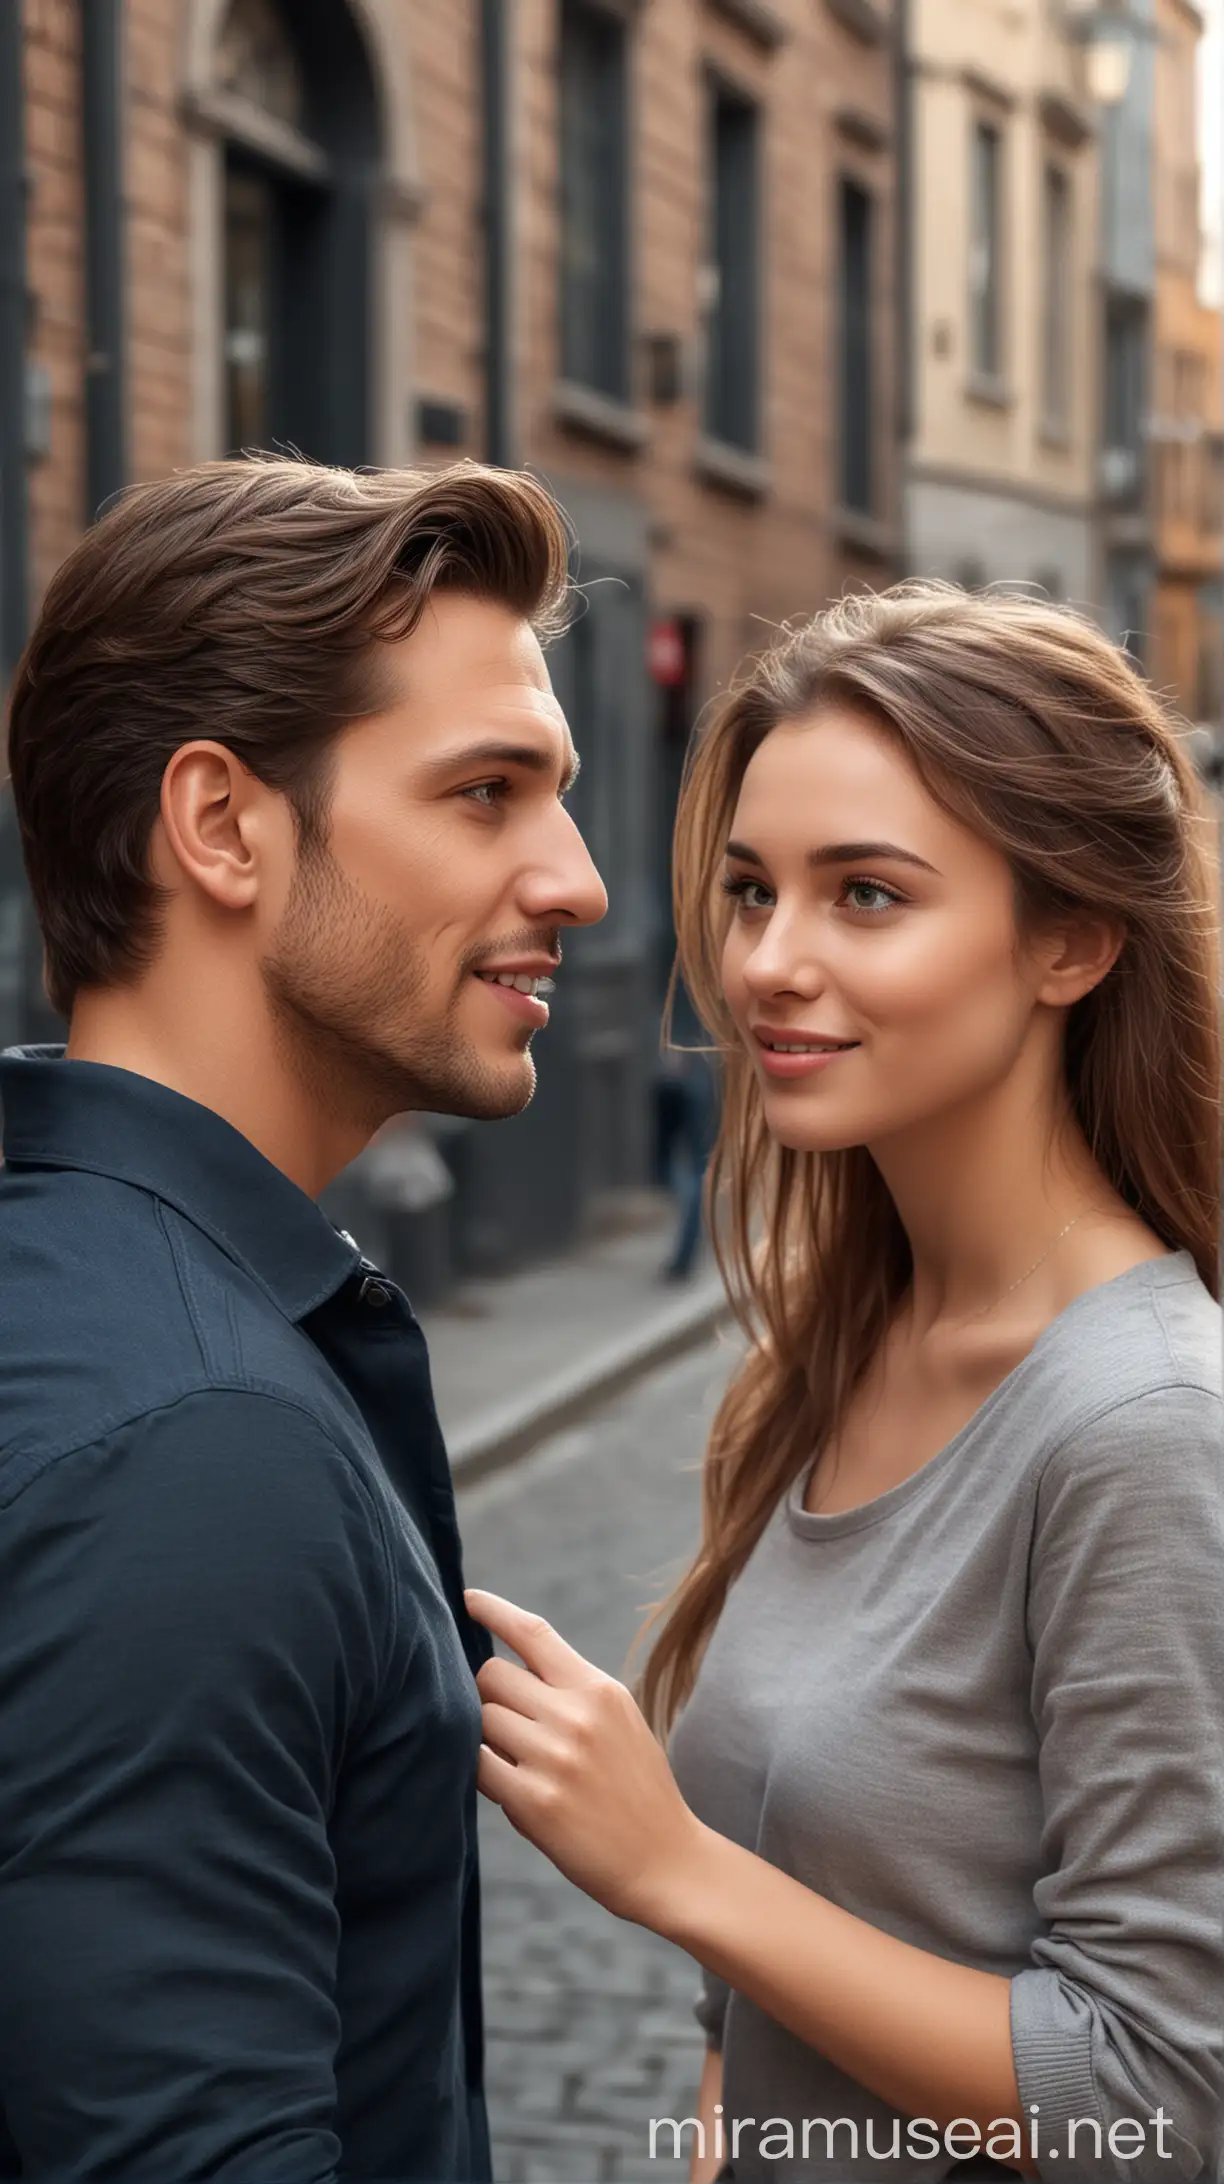 create an realistic image of a confident man talking with a beautiful girl in the street